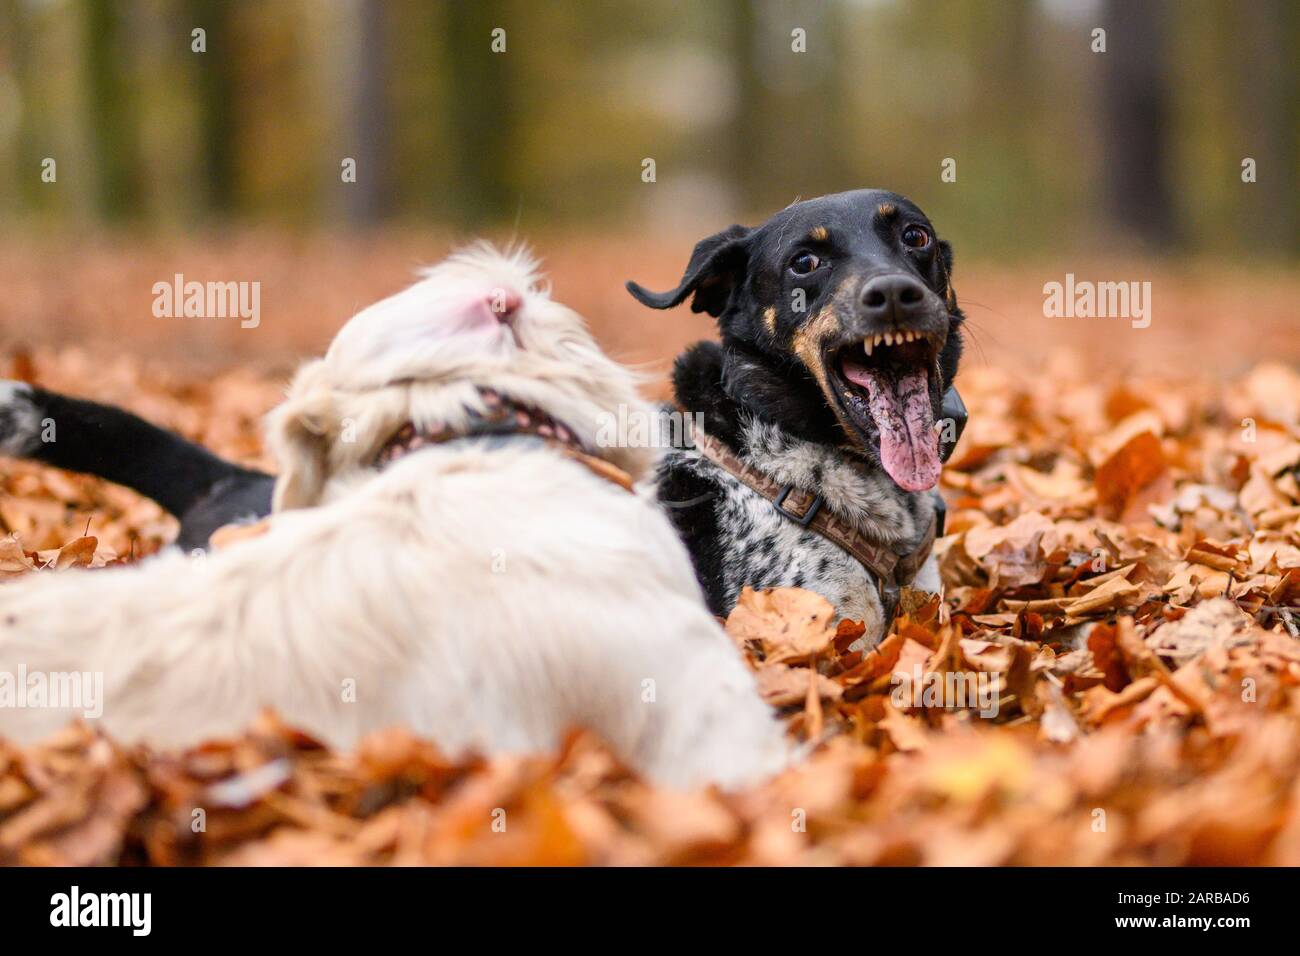 Young golden retriver playing in fallen leaves Stock Photo